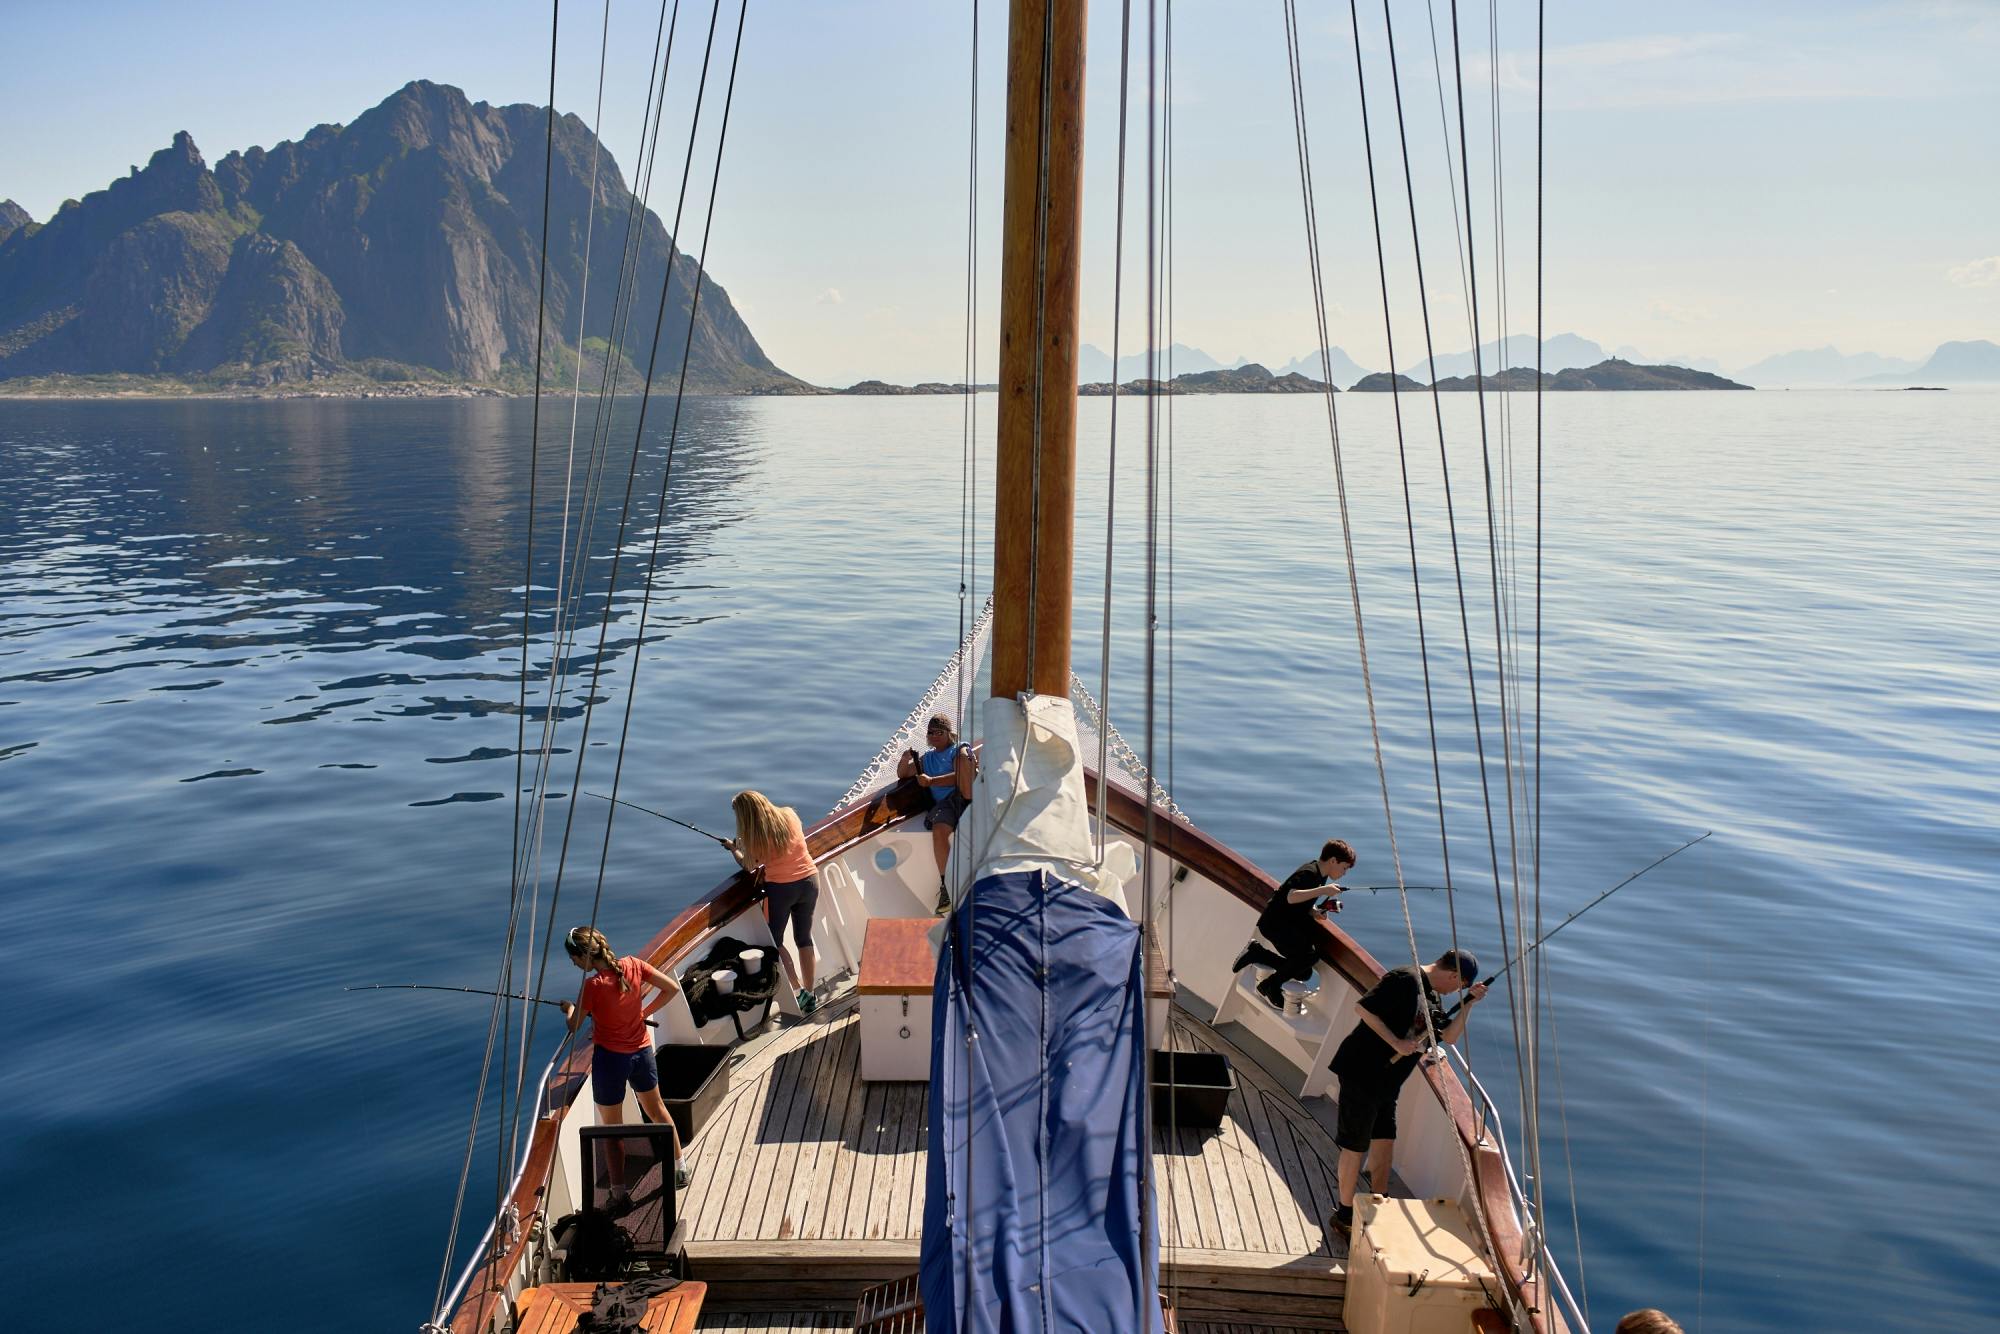 Lofoten Fjord cruise and fishing on a luxury yacht